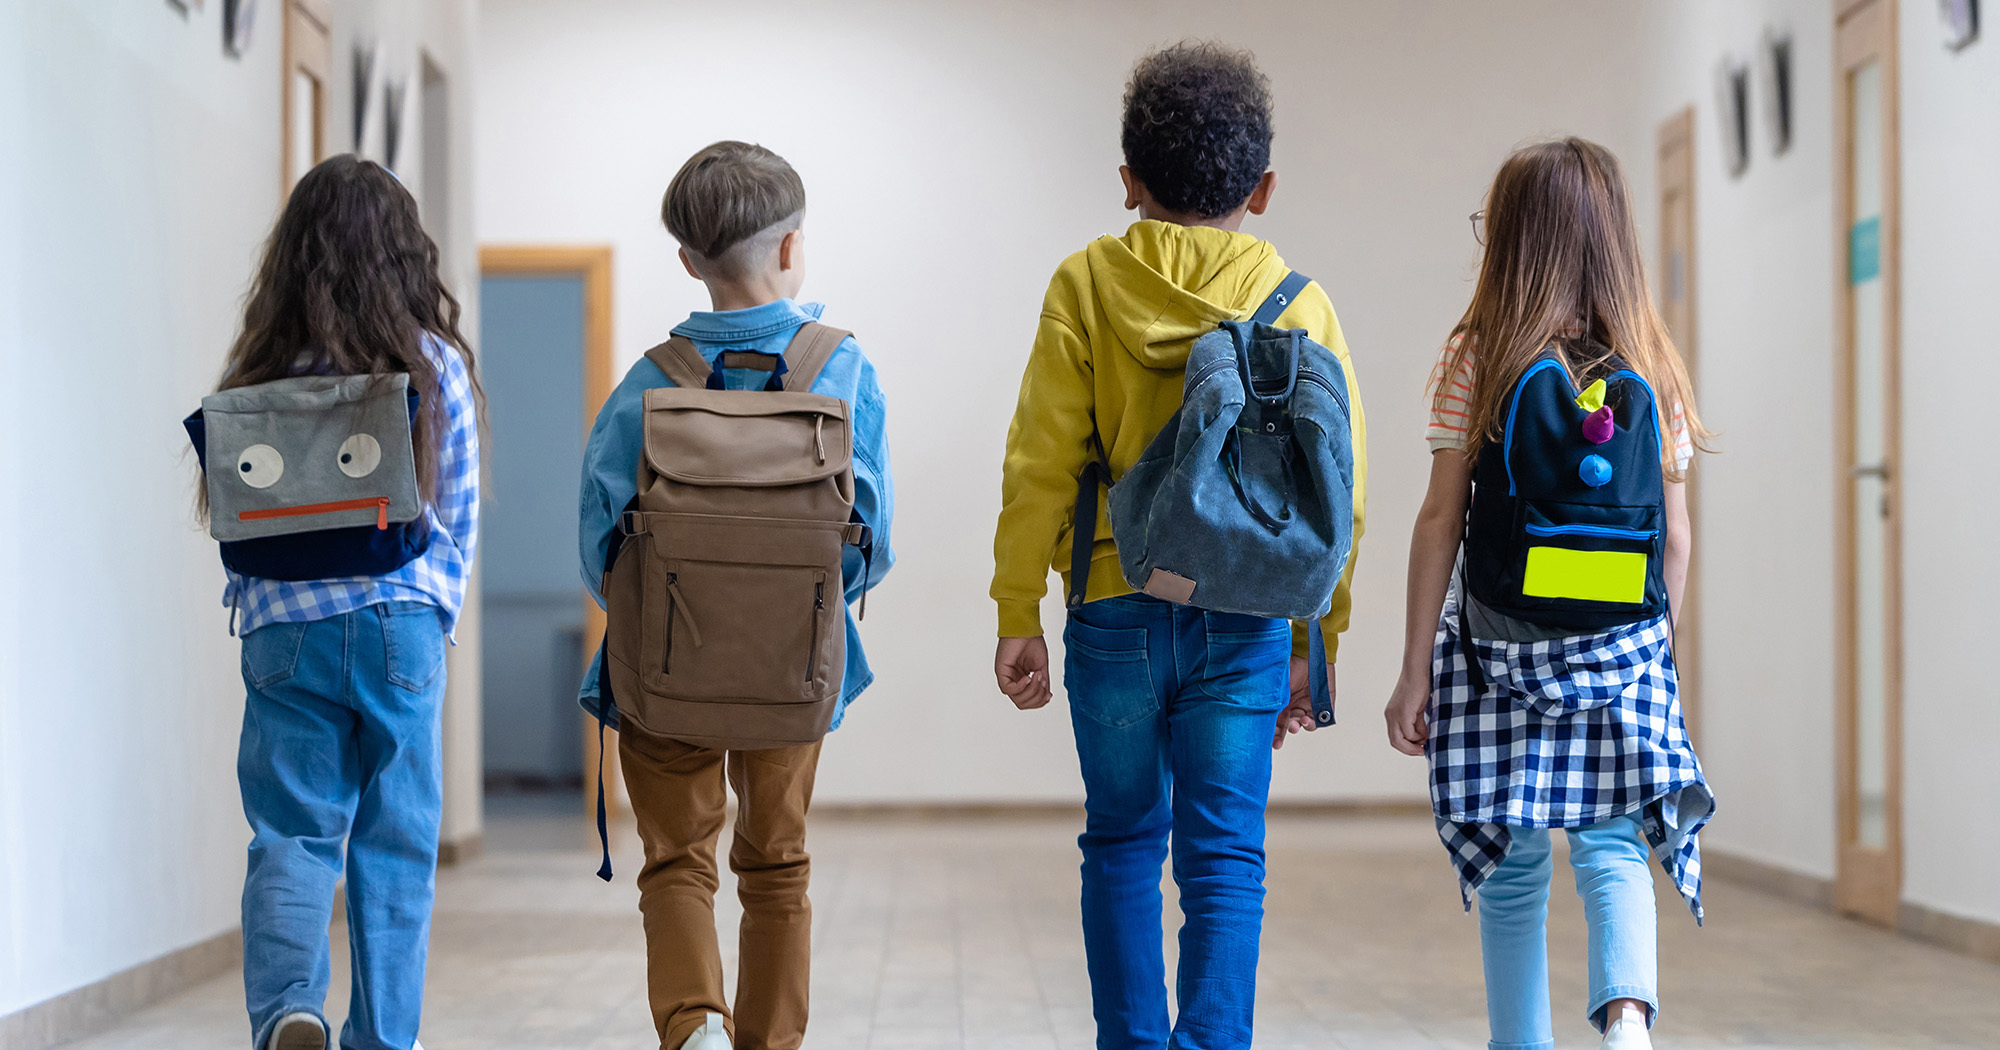 four young children, age 5 to 7, with backpacks walk in a school hallway. Their backs are to the camera.